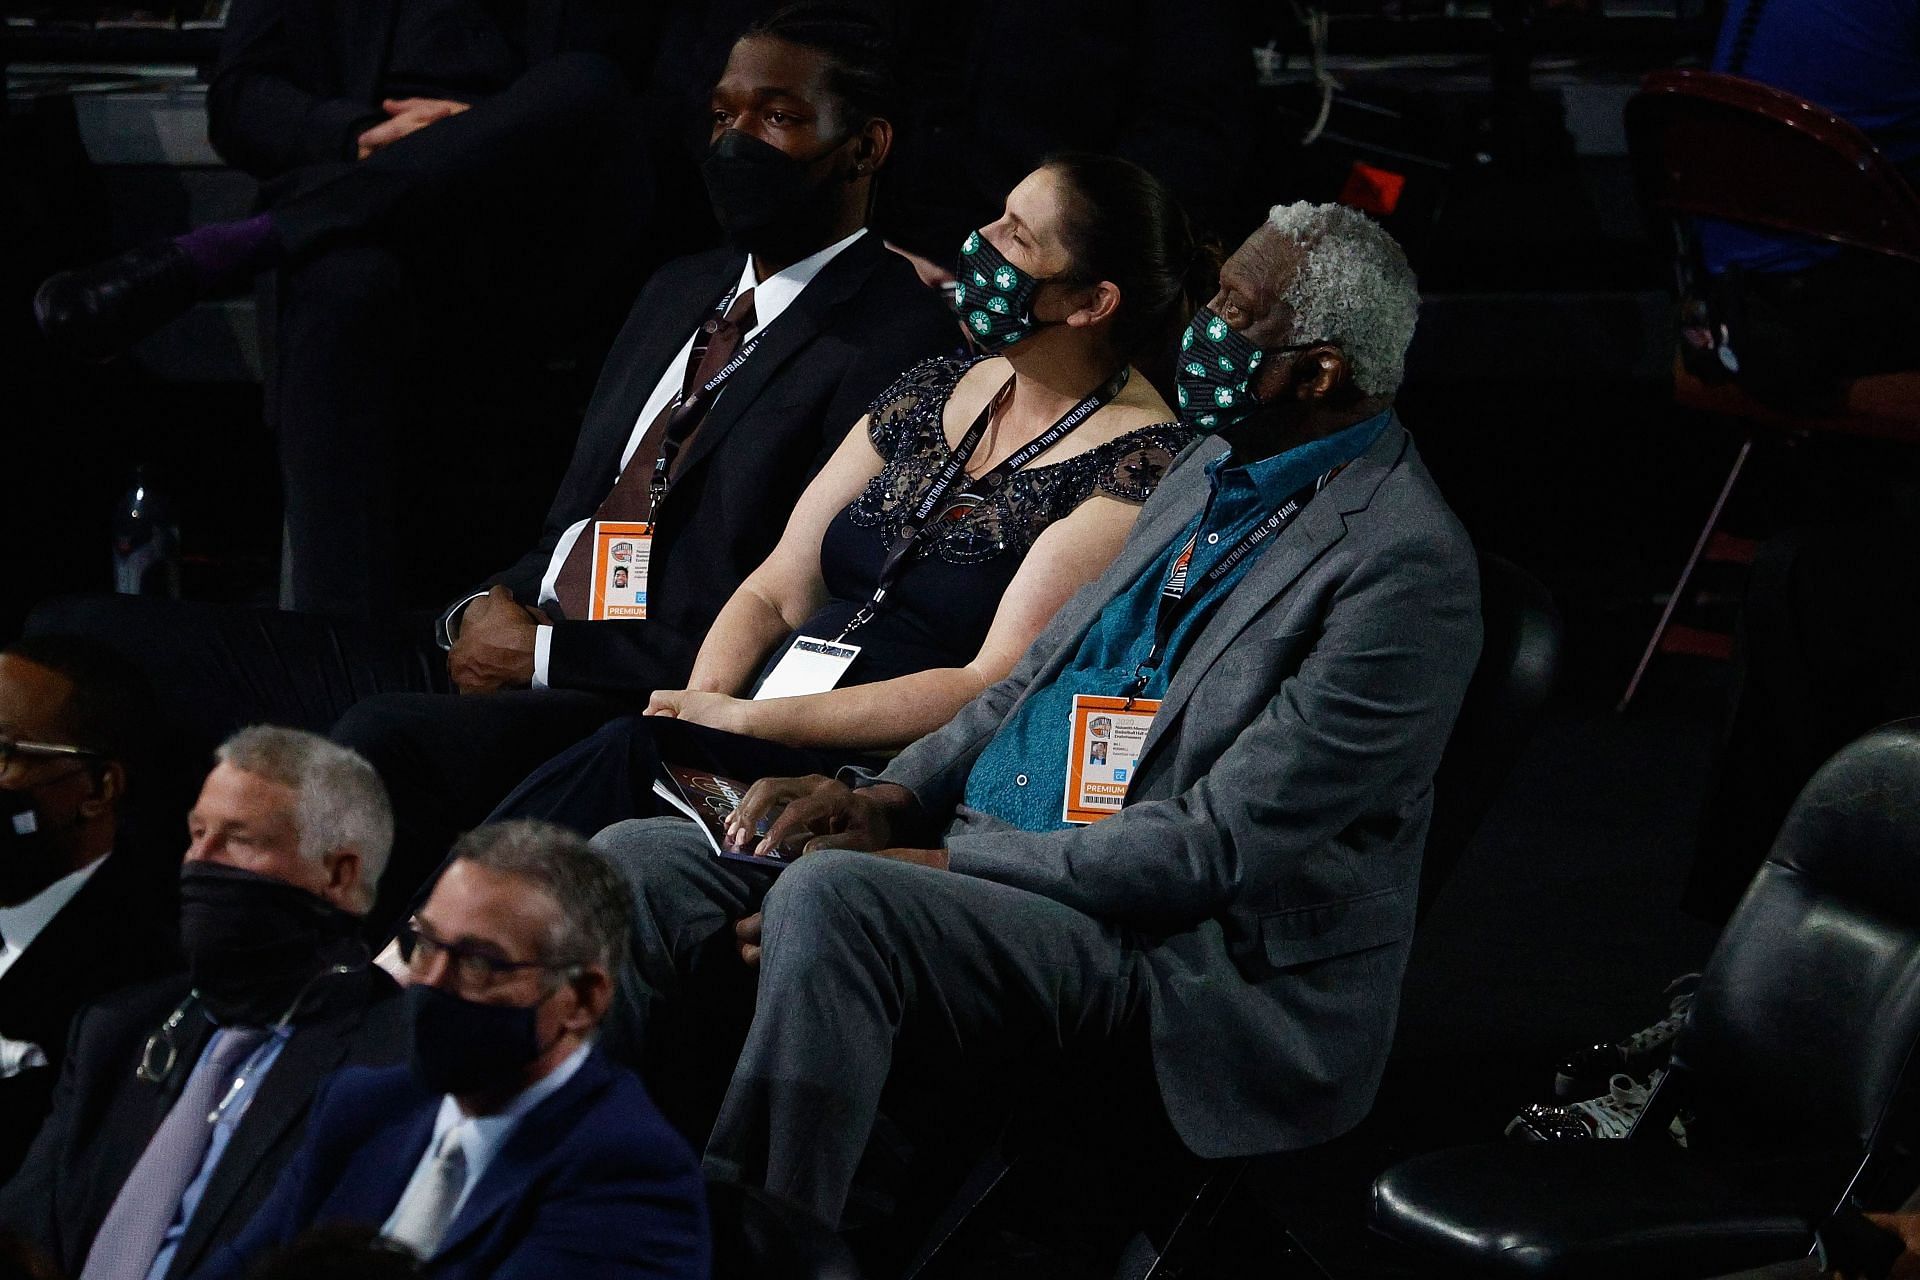 Russell attends the 2021 Basketball Hall of Fame Enshrinement Ceremony with his final wife.